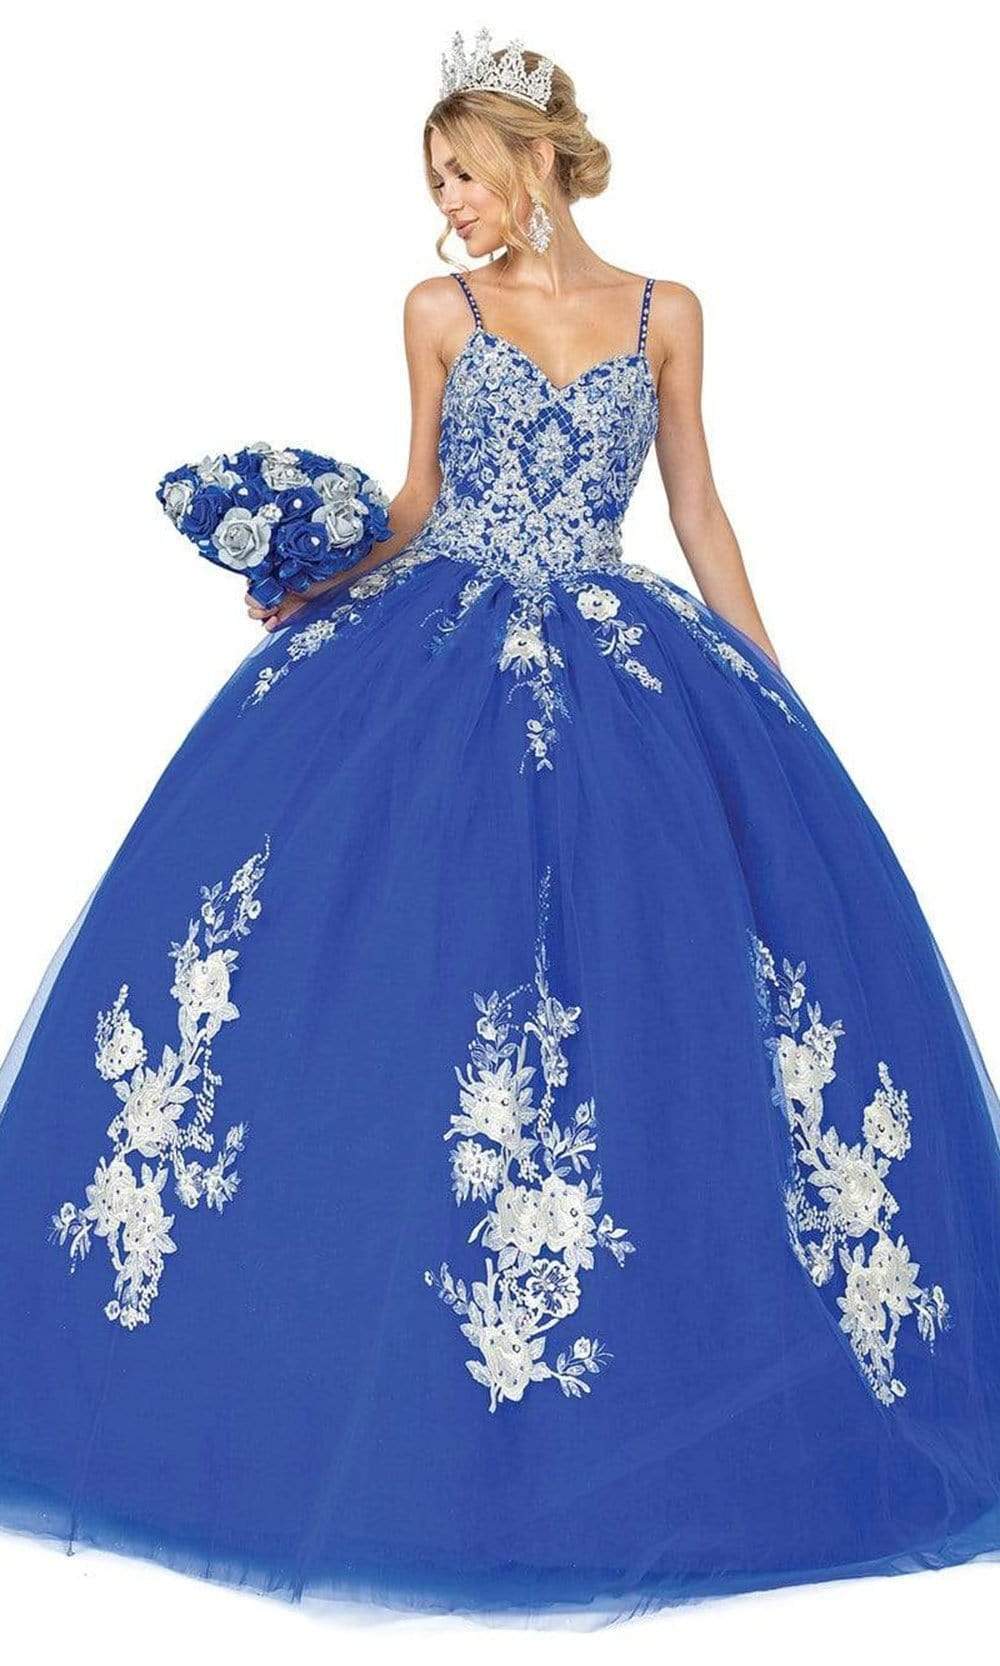 Image of Dancing Queen - 1544 V-neck Corset Lace-Up Back Applique Ballgown